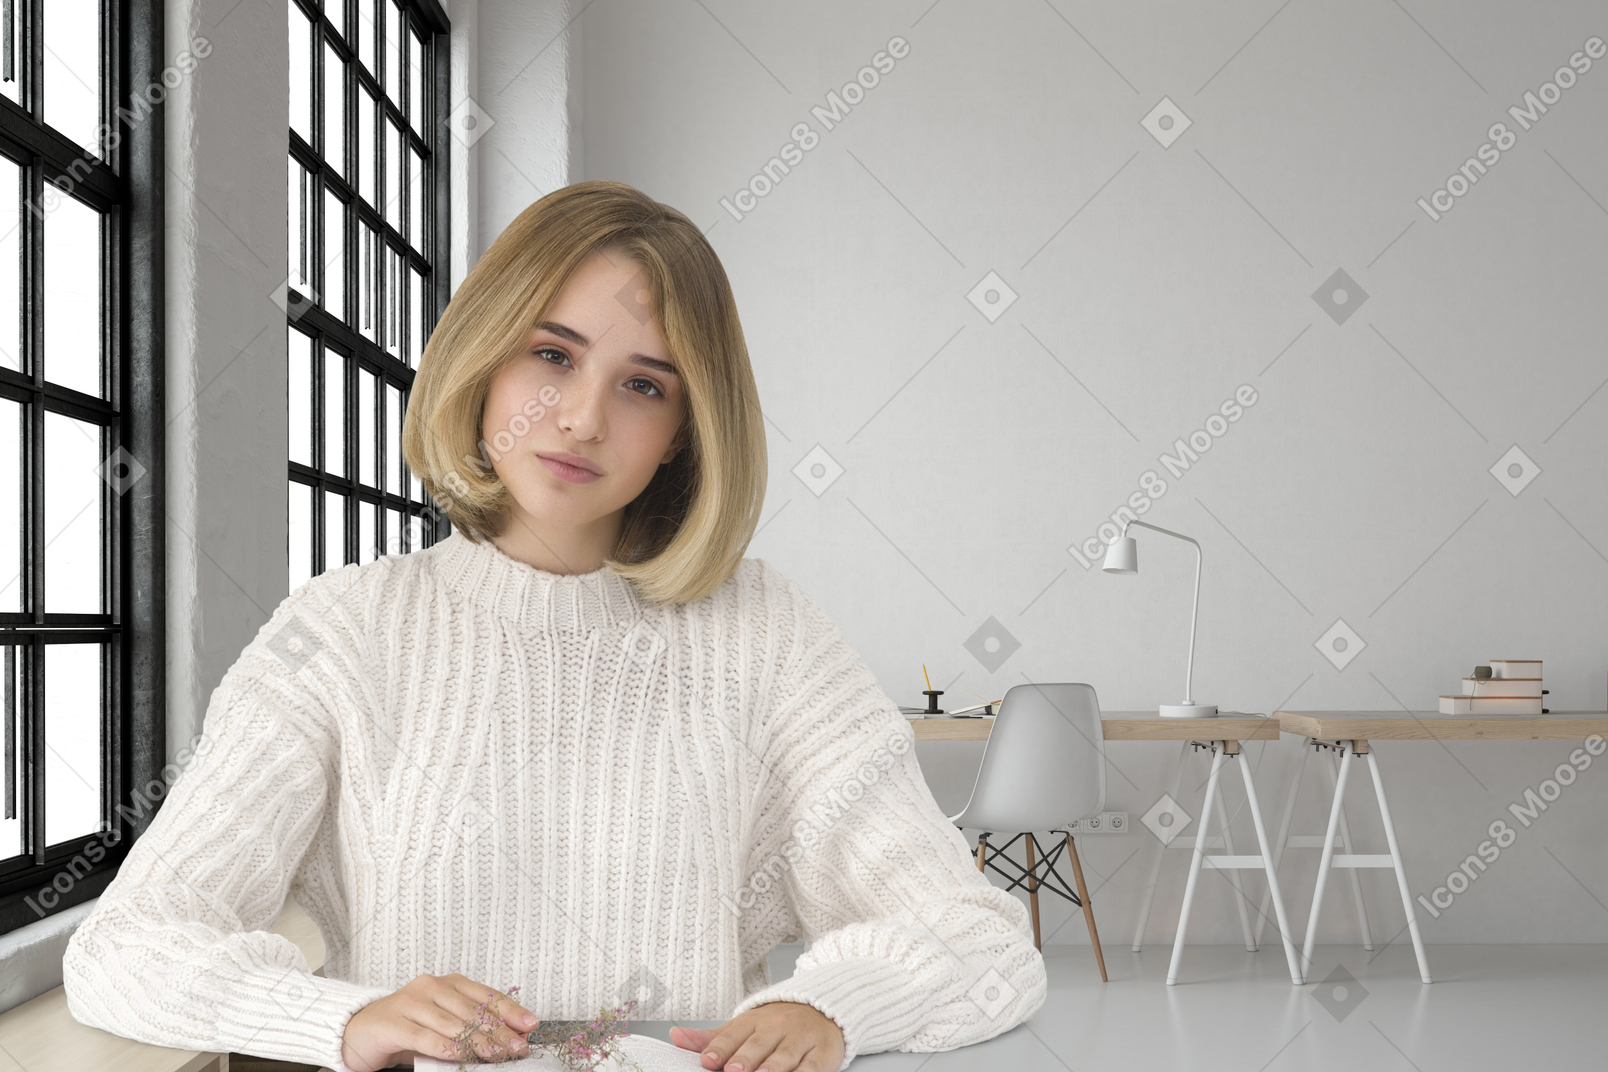 A woman sitting at a table with a book